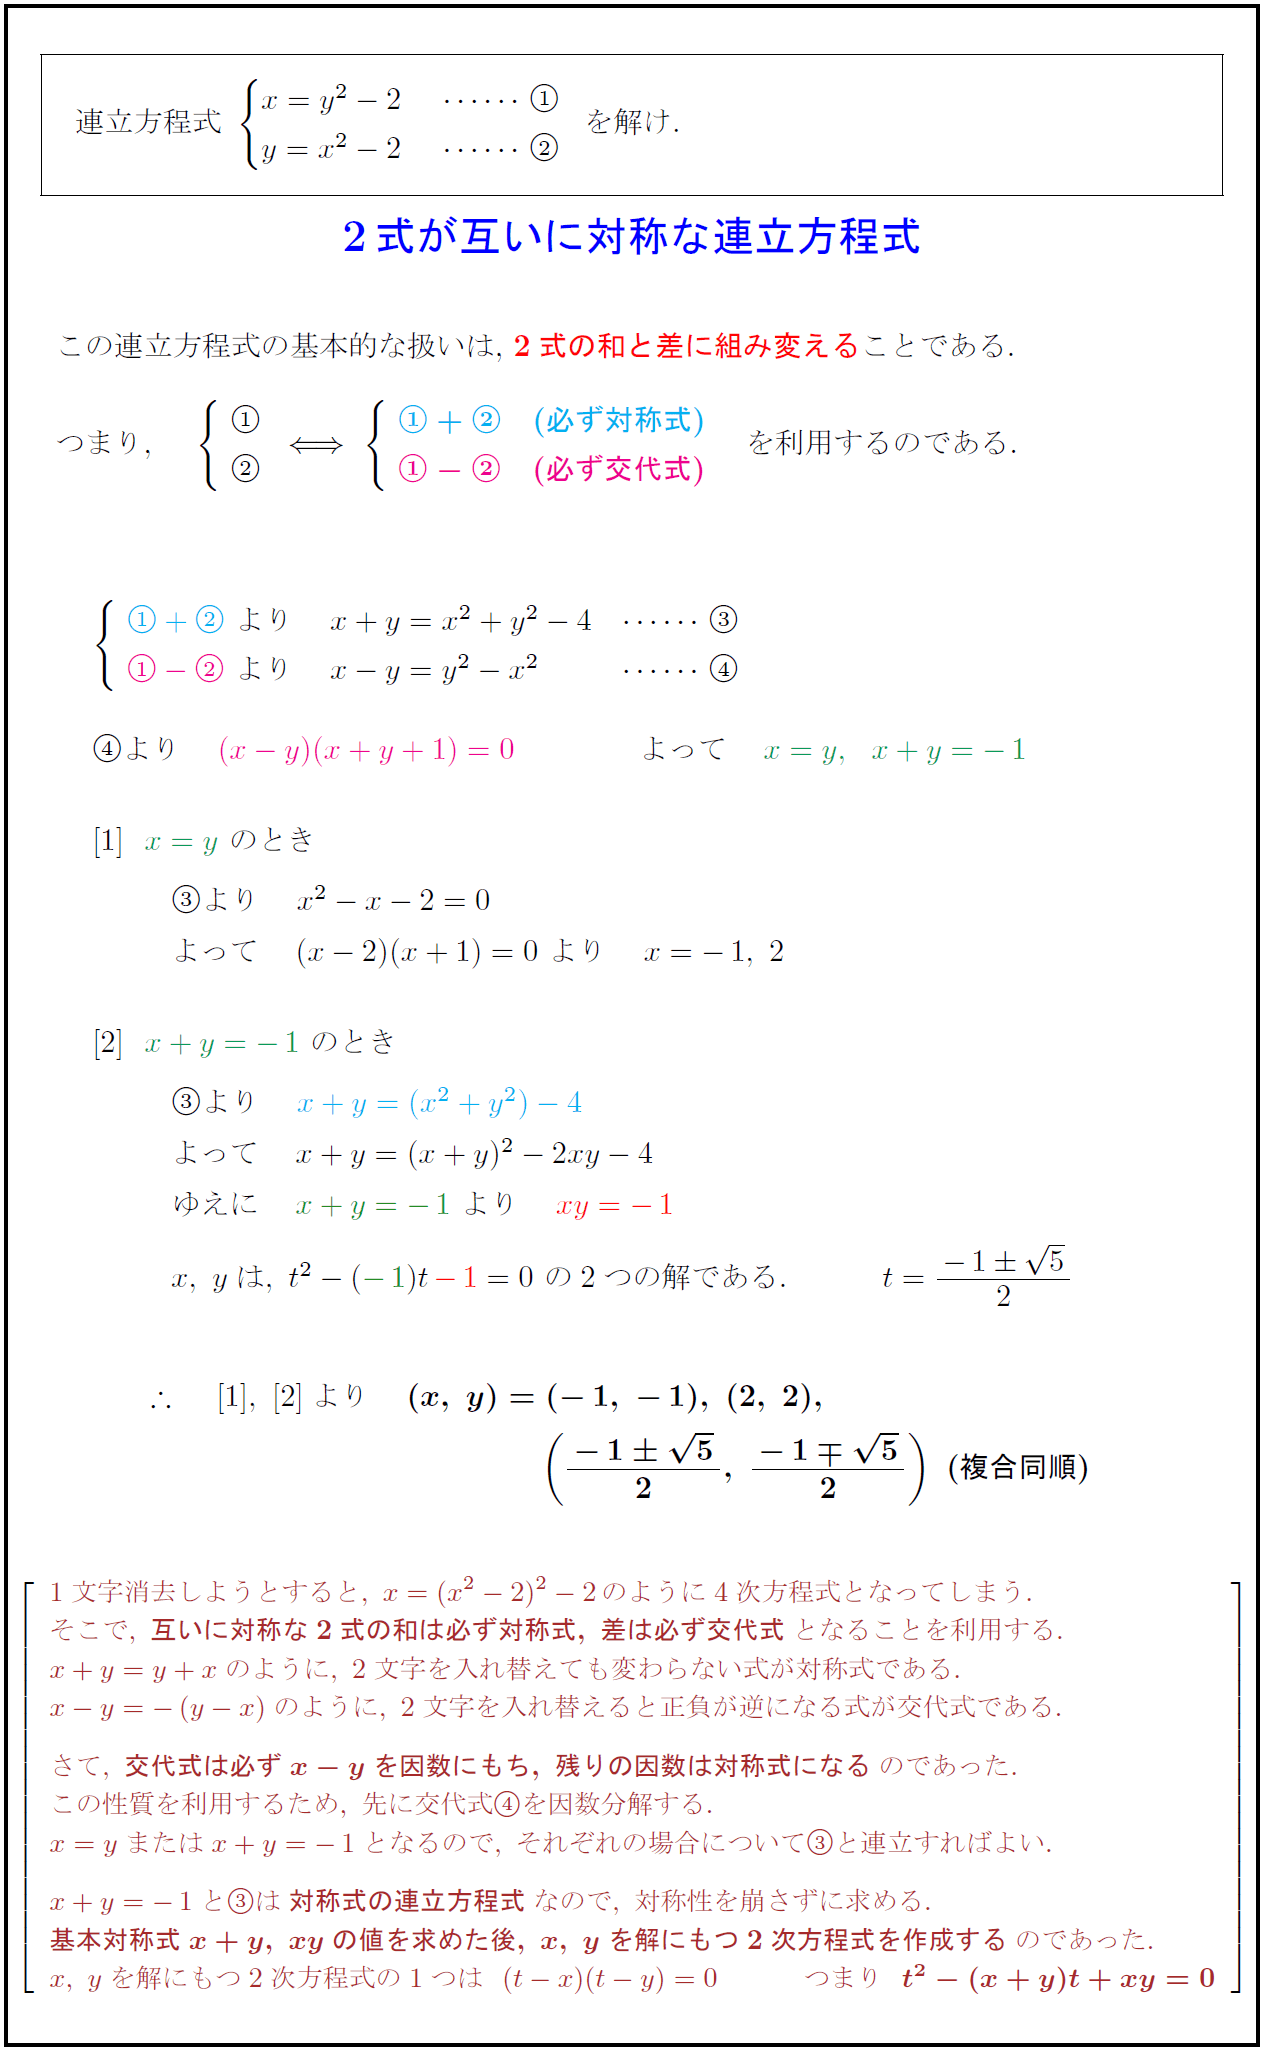 complex-number-equality